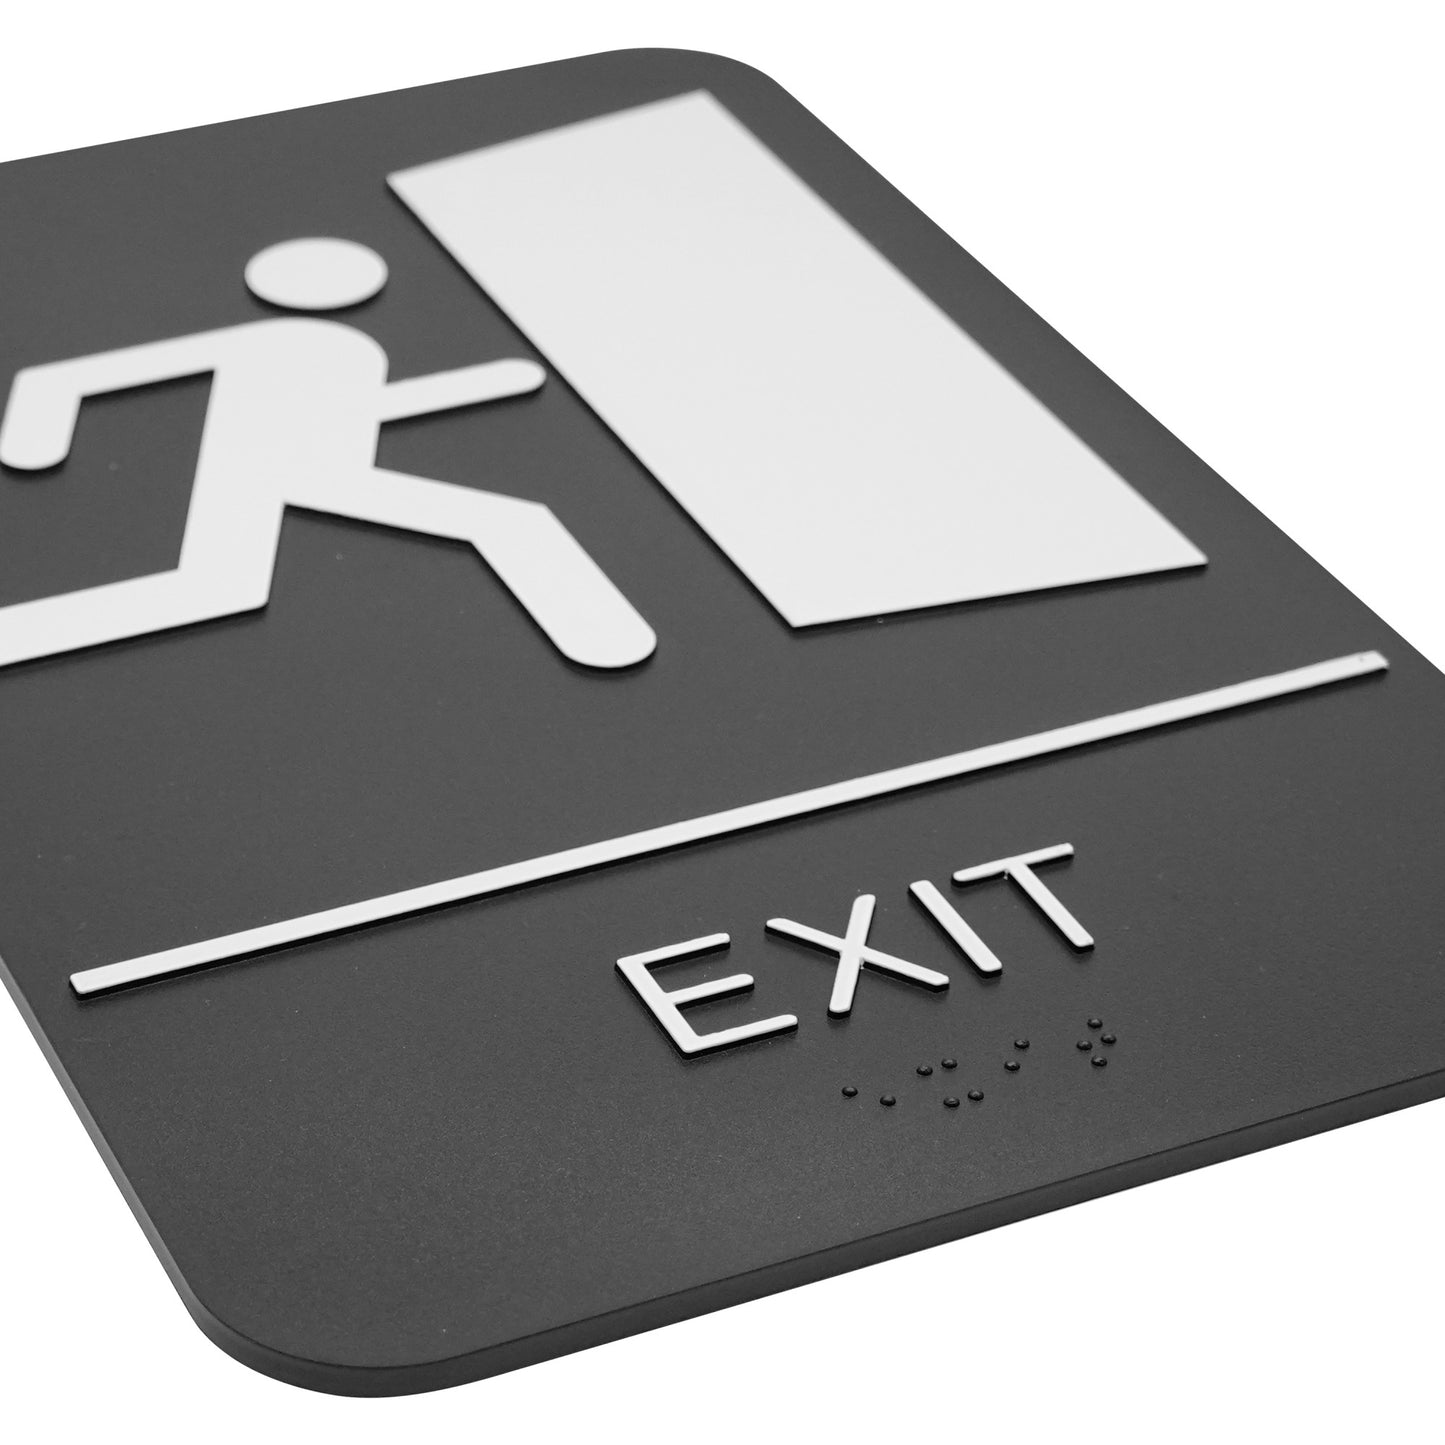 SGNB-604 - Information Signs with Braille, 6"W x 9"H - Exit